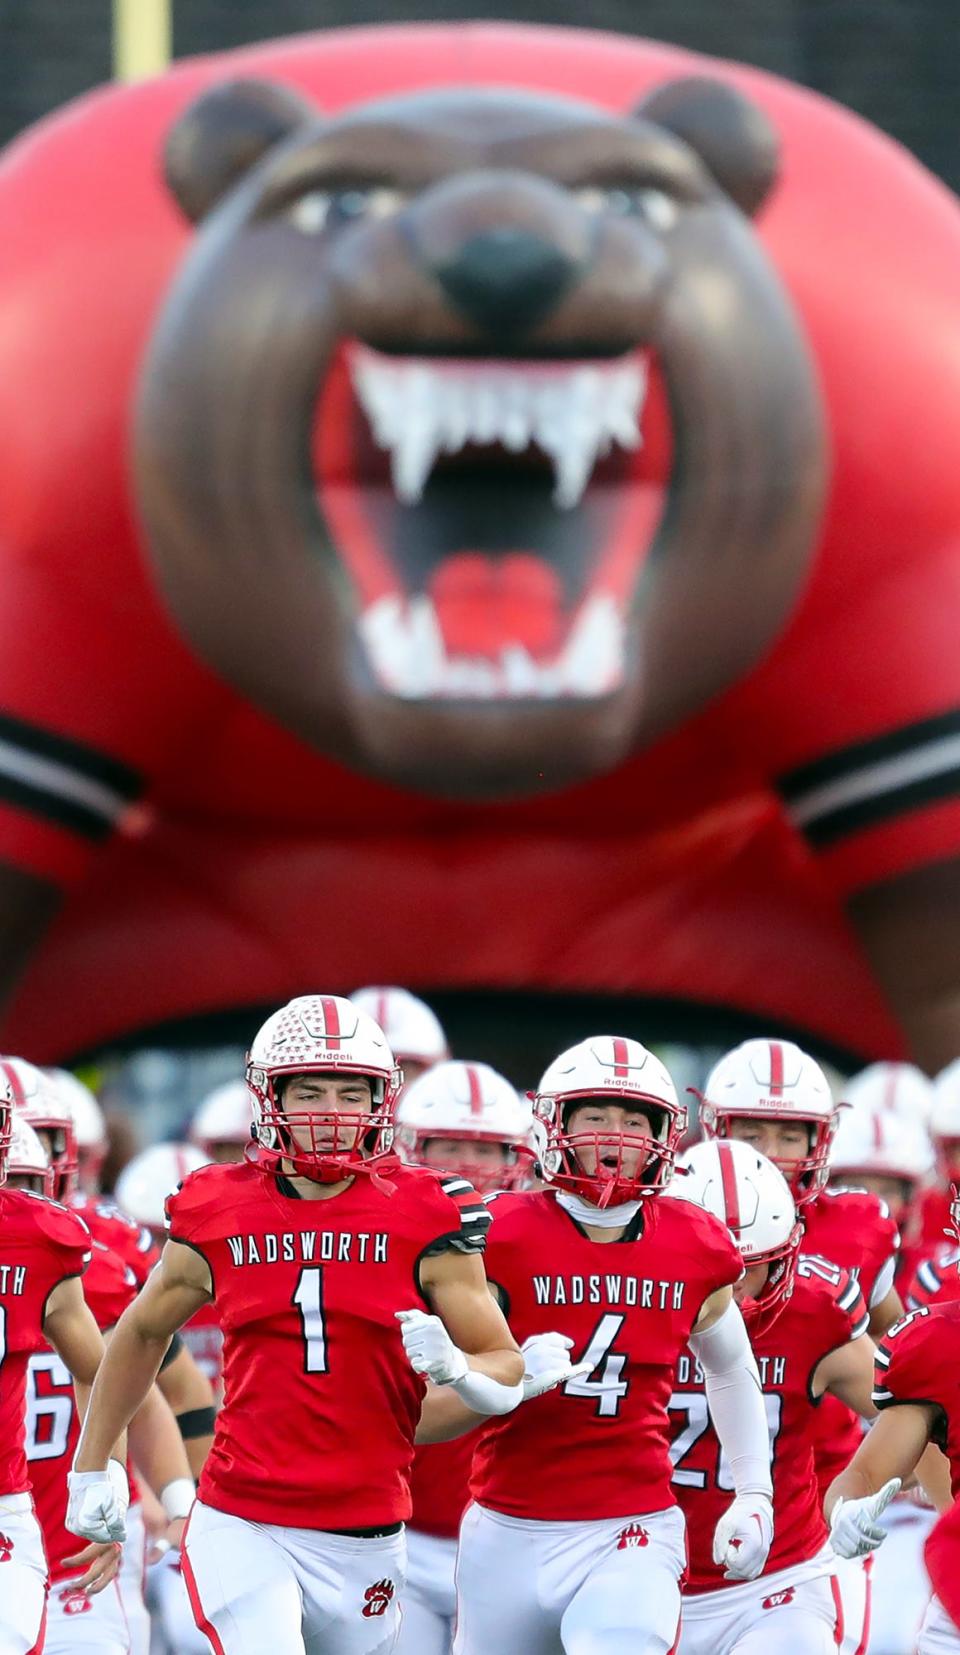 The Wadsworth High School football team takes the field on Sept. 23, 2022.